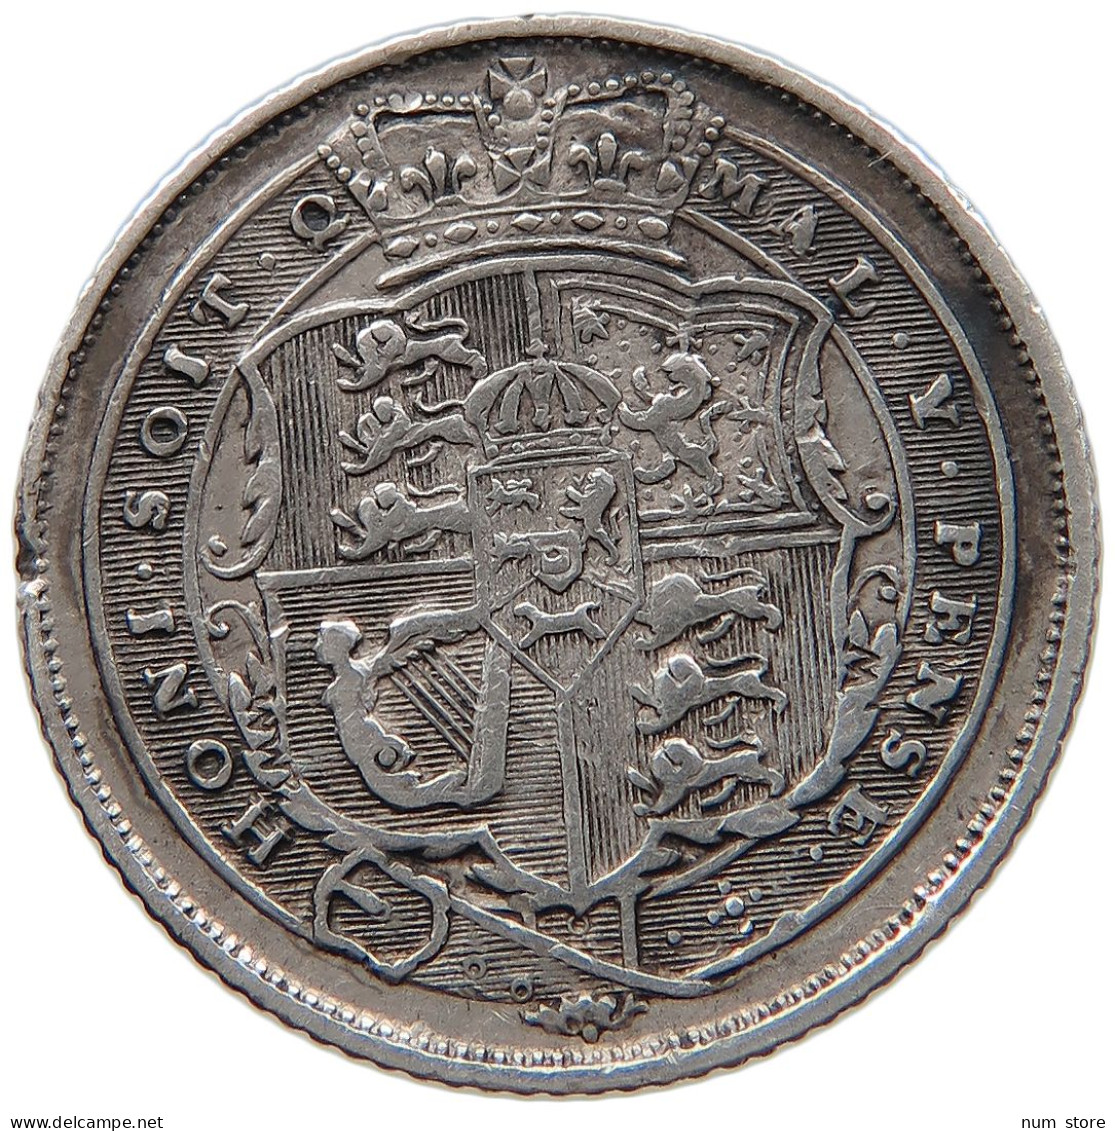 GREAT BRITAIN SIXPENCE 1819 GEORGE III. 1760-1820 #t143 0601 - H. 6 Pence